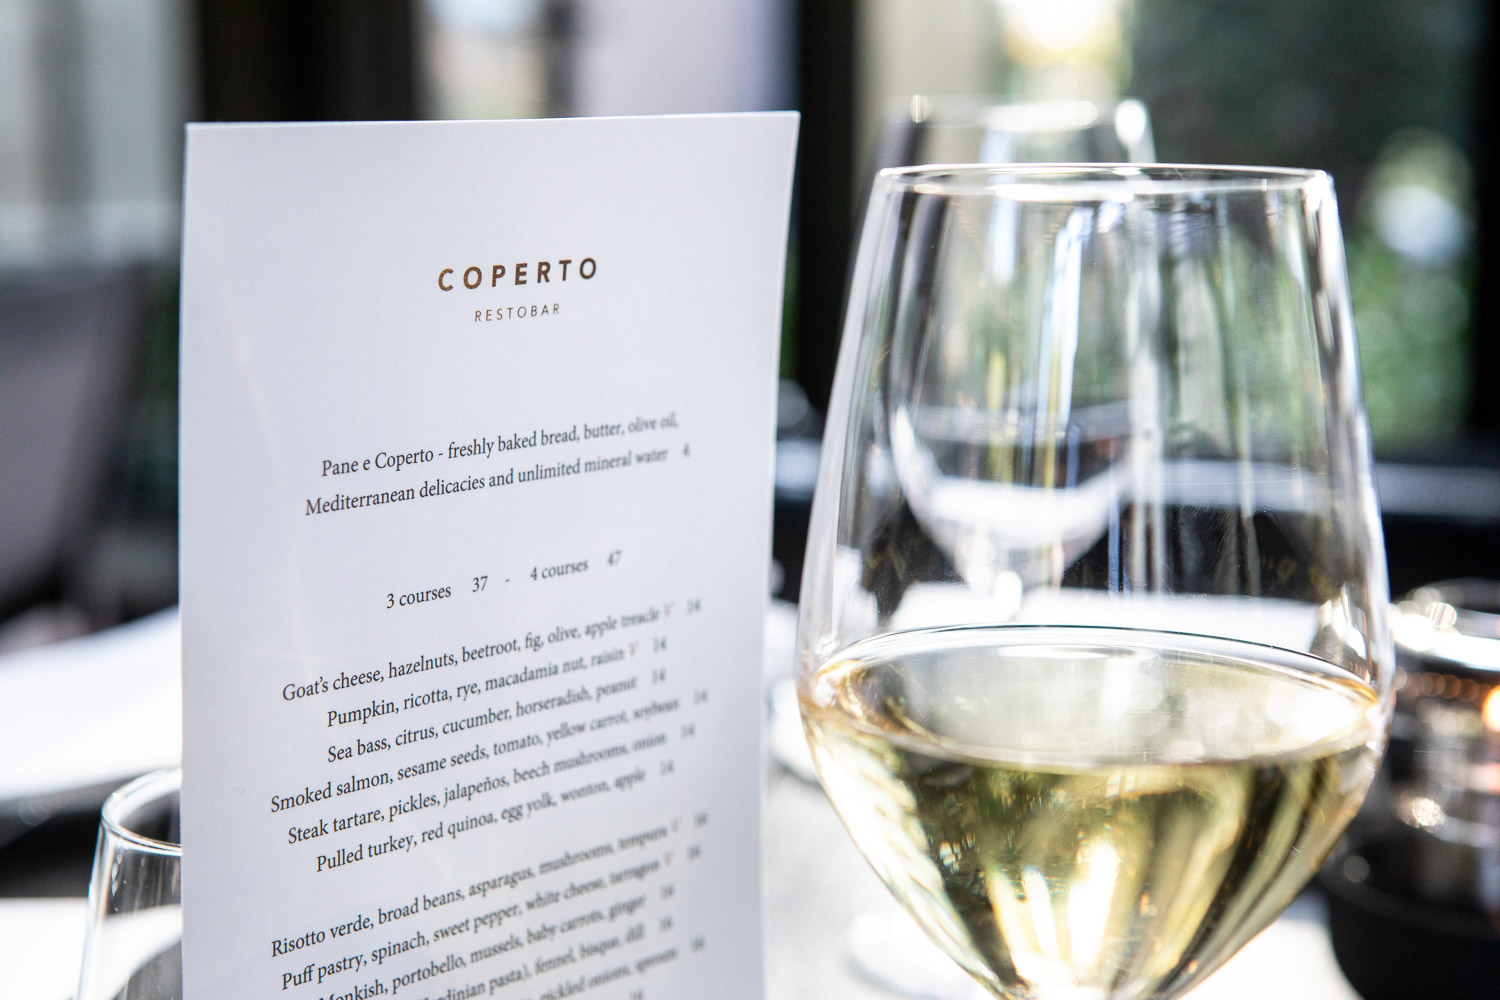 The menu card of Coperto Restobar in Zwolle with a glass of wine